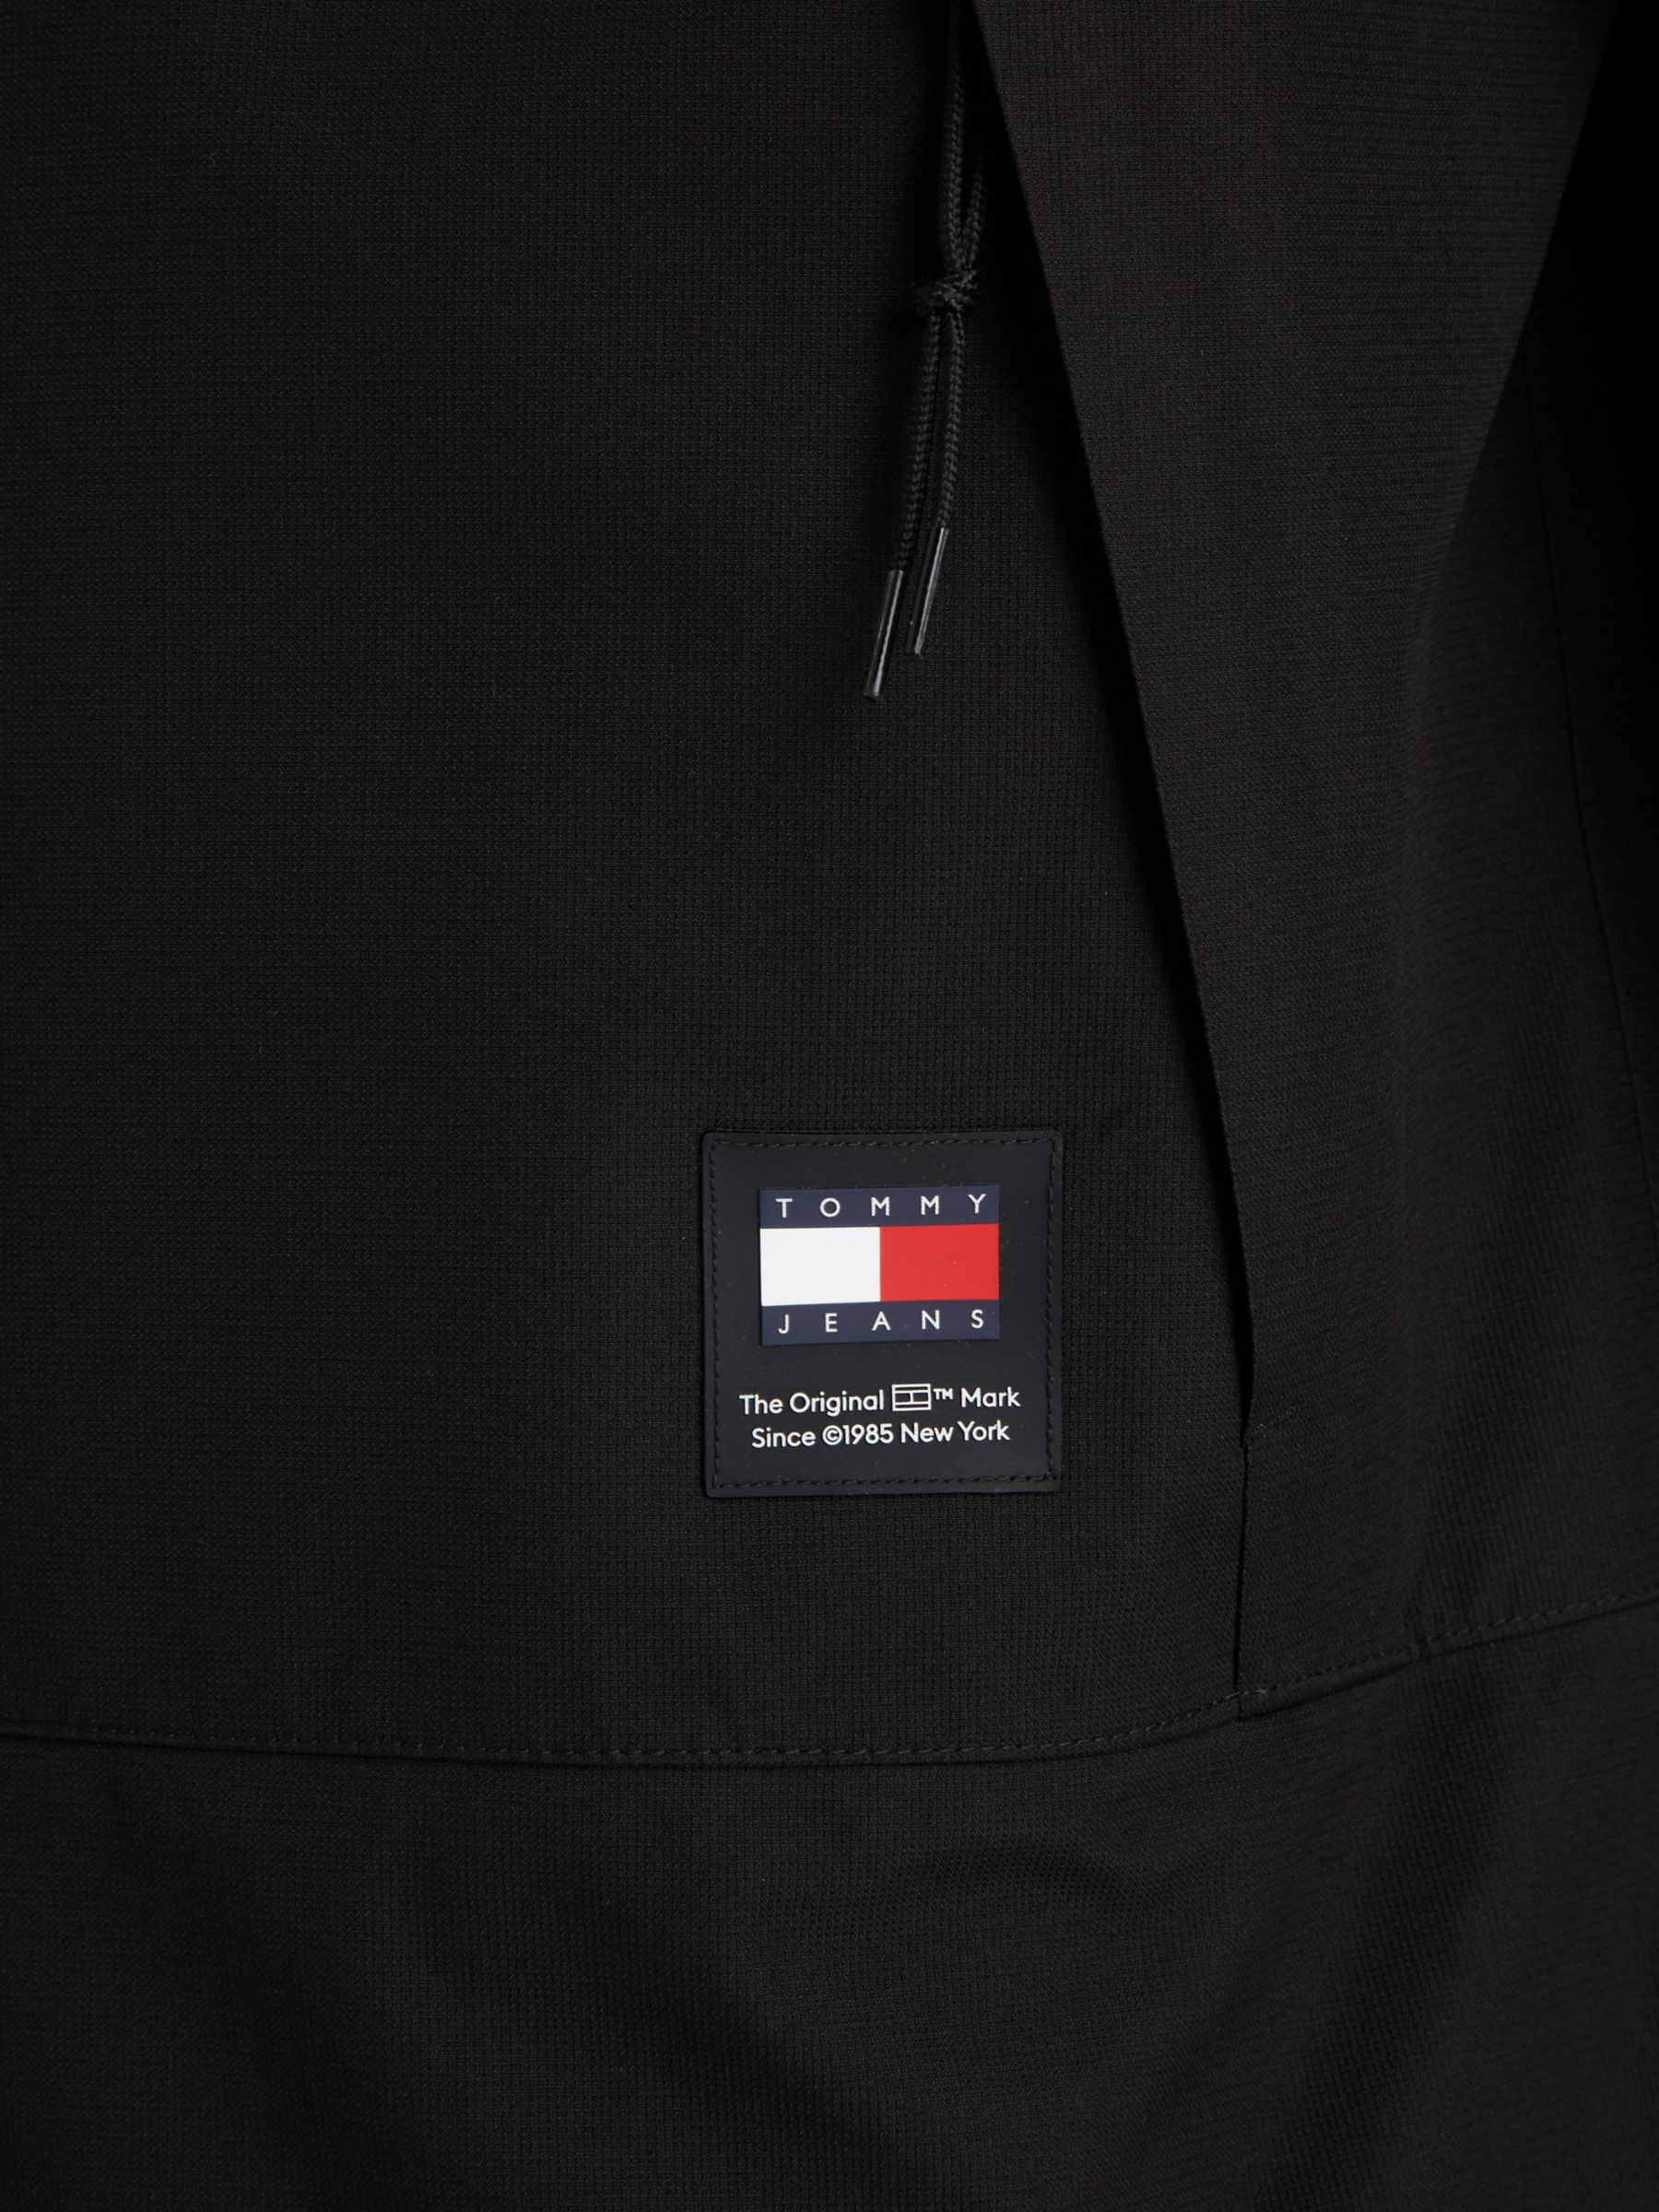 Tommy Jeans Tech Outdoor Chicago Jacket, Black at John Lewis & Partners